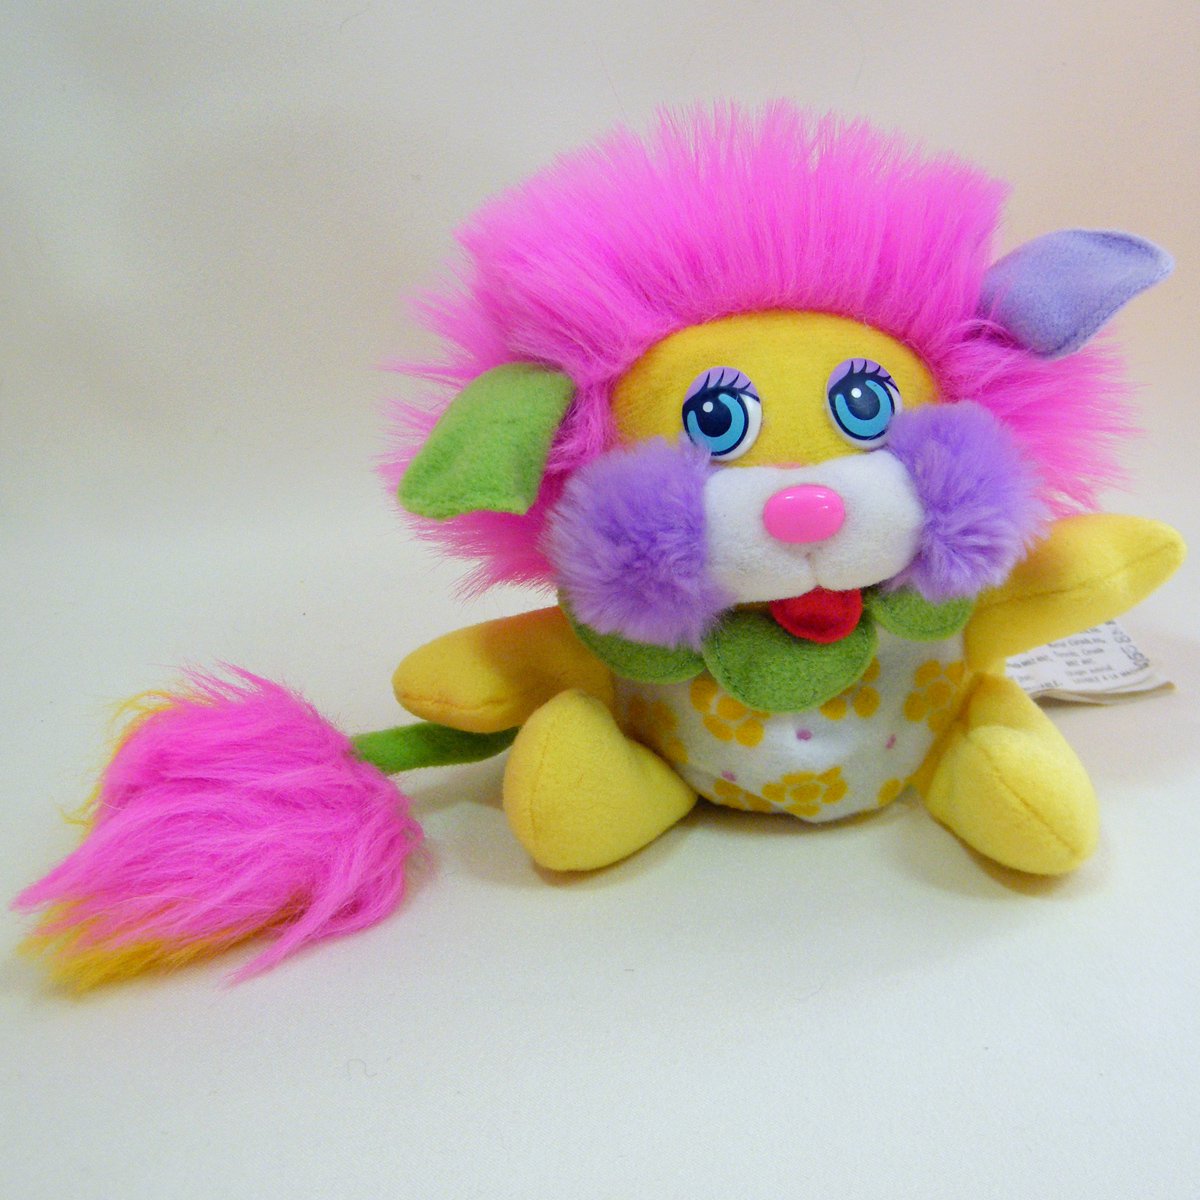 Vintage FLOWER Popples BUTTERCUP with Magenta Hair, Yellow Body TCFC